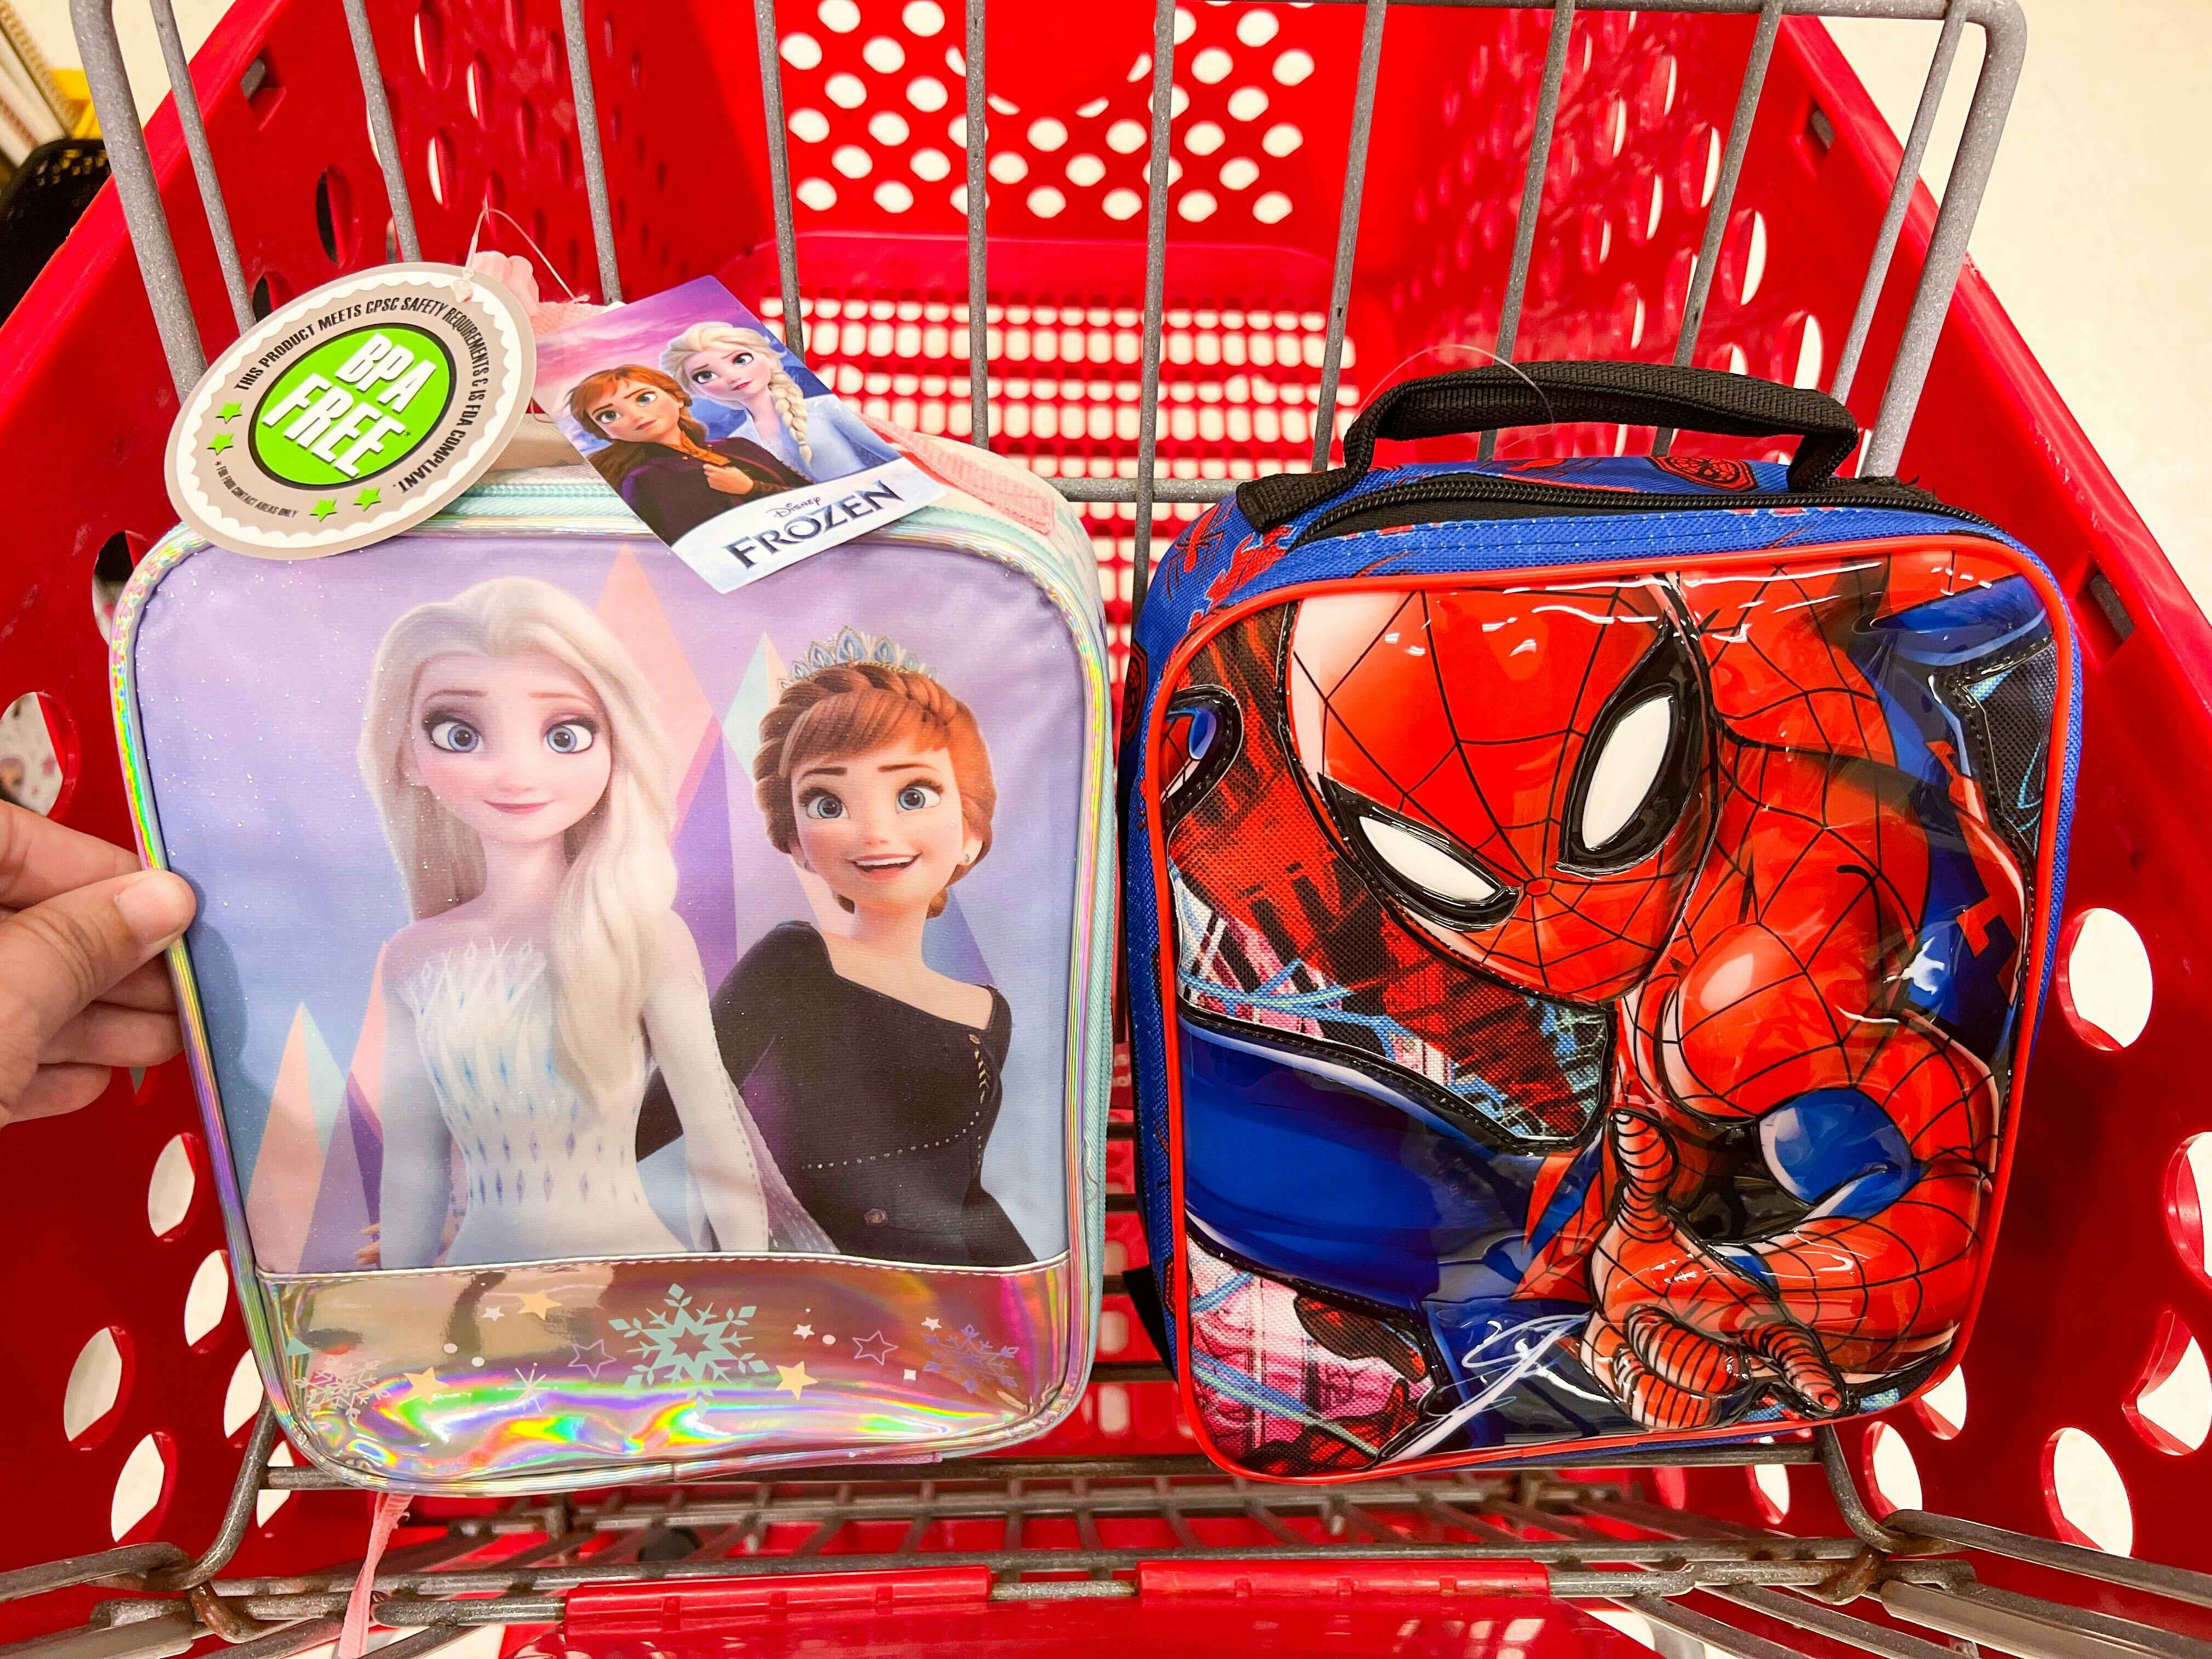 Bentgo Kids Chill Lunch Box 2-Pack Just $29.99 on Costco.com